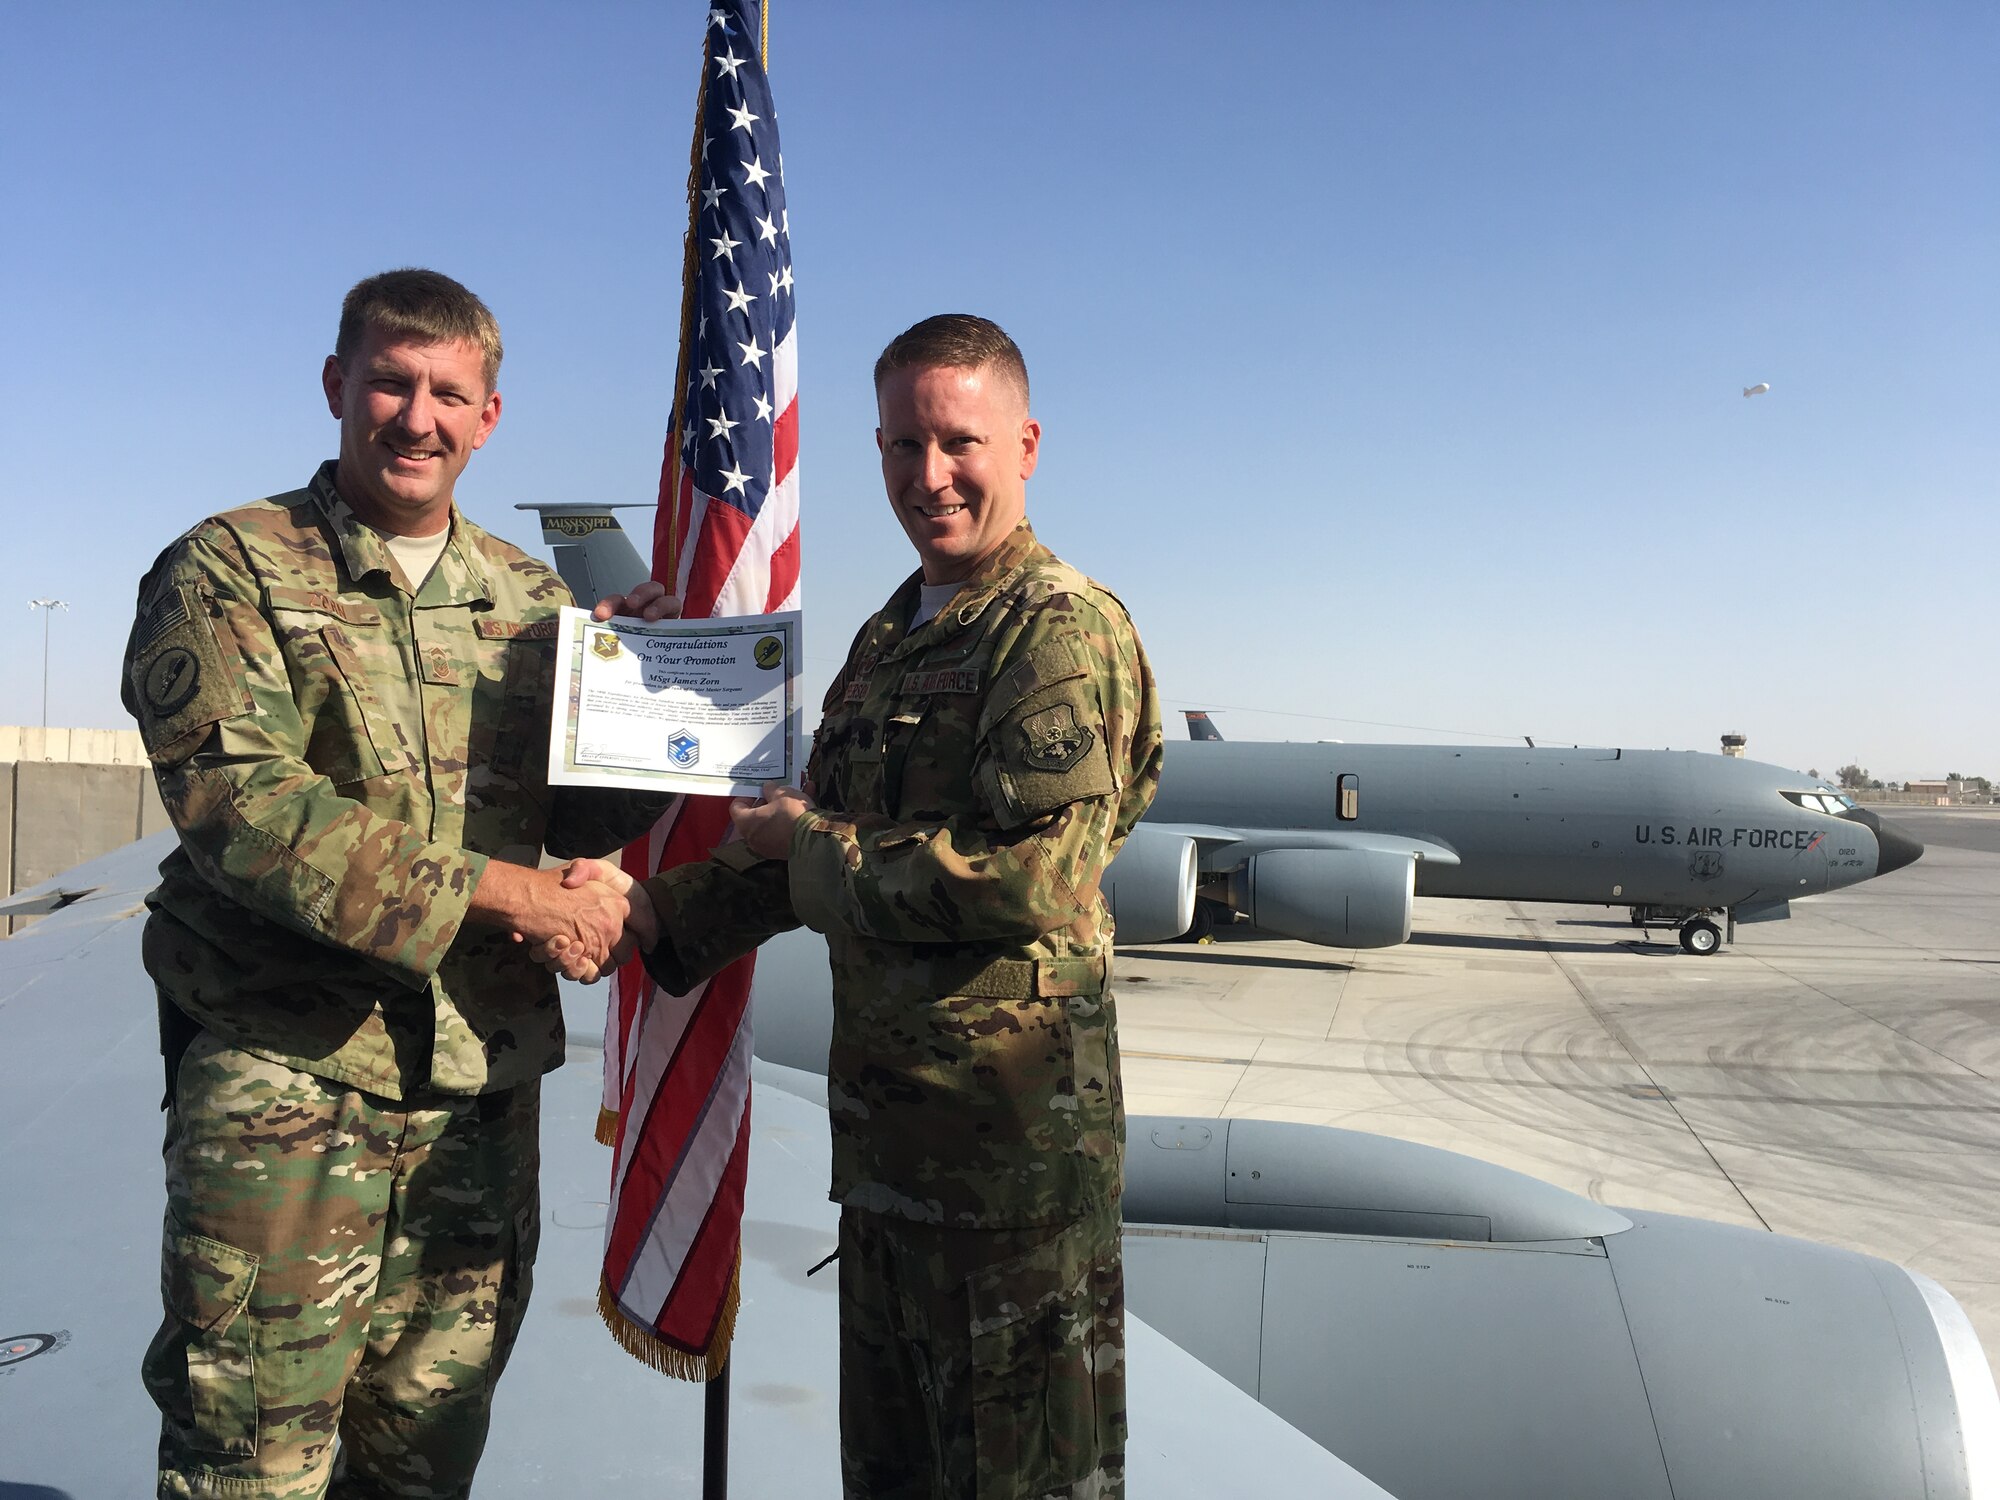 Senior Master Sgt. James Zorn, 187th Fighter Wing first sergeant, receives a Certificate of Promotion to his current rank September 25, 2018, while deployed with the 340th Expeditionary Air Refueling Squadron in southwest Asia. (Courtesy photo by Senior Master Sgt. James Zorn)